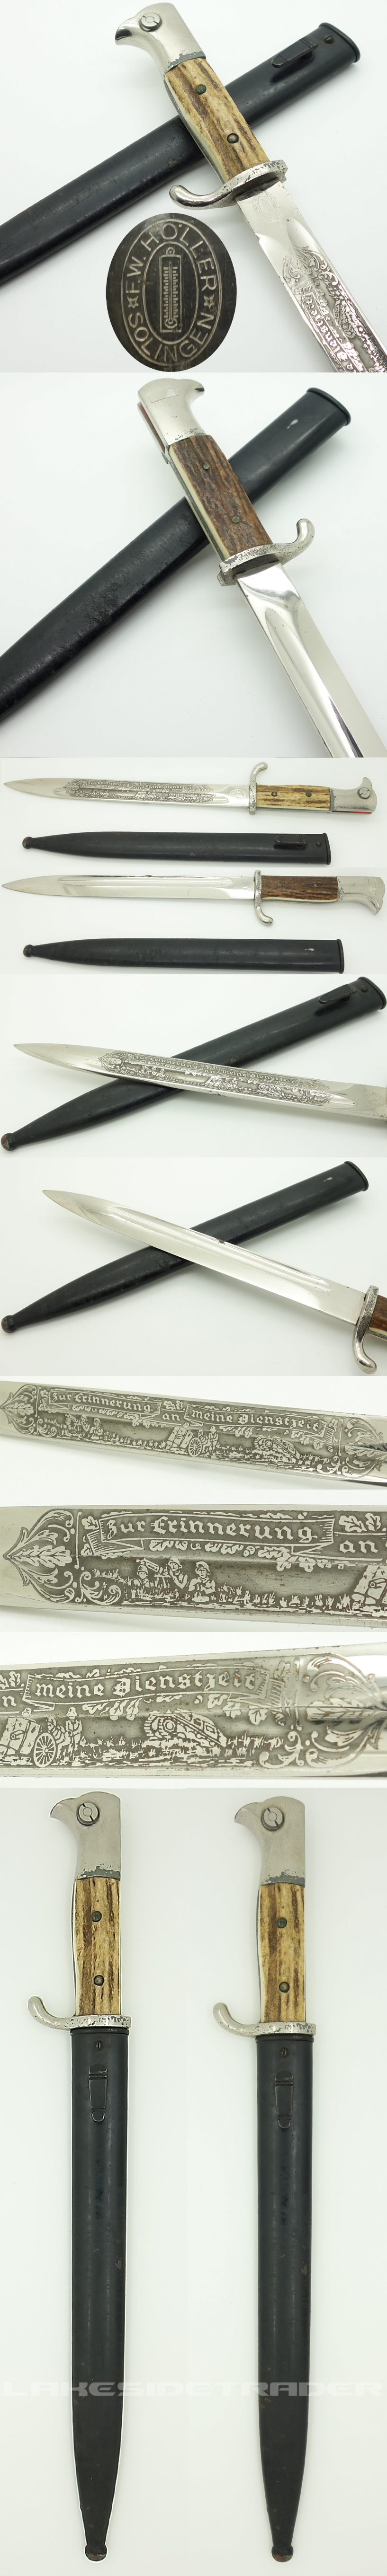 Etched Long Stag Bayonet by Höller